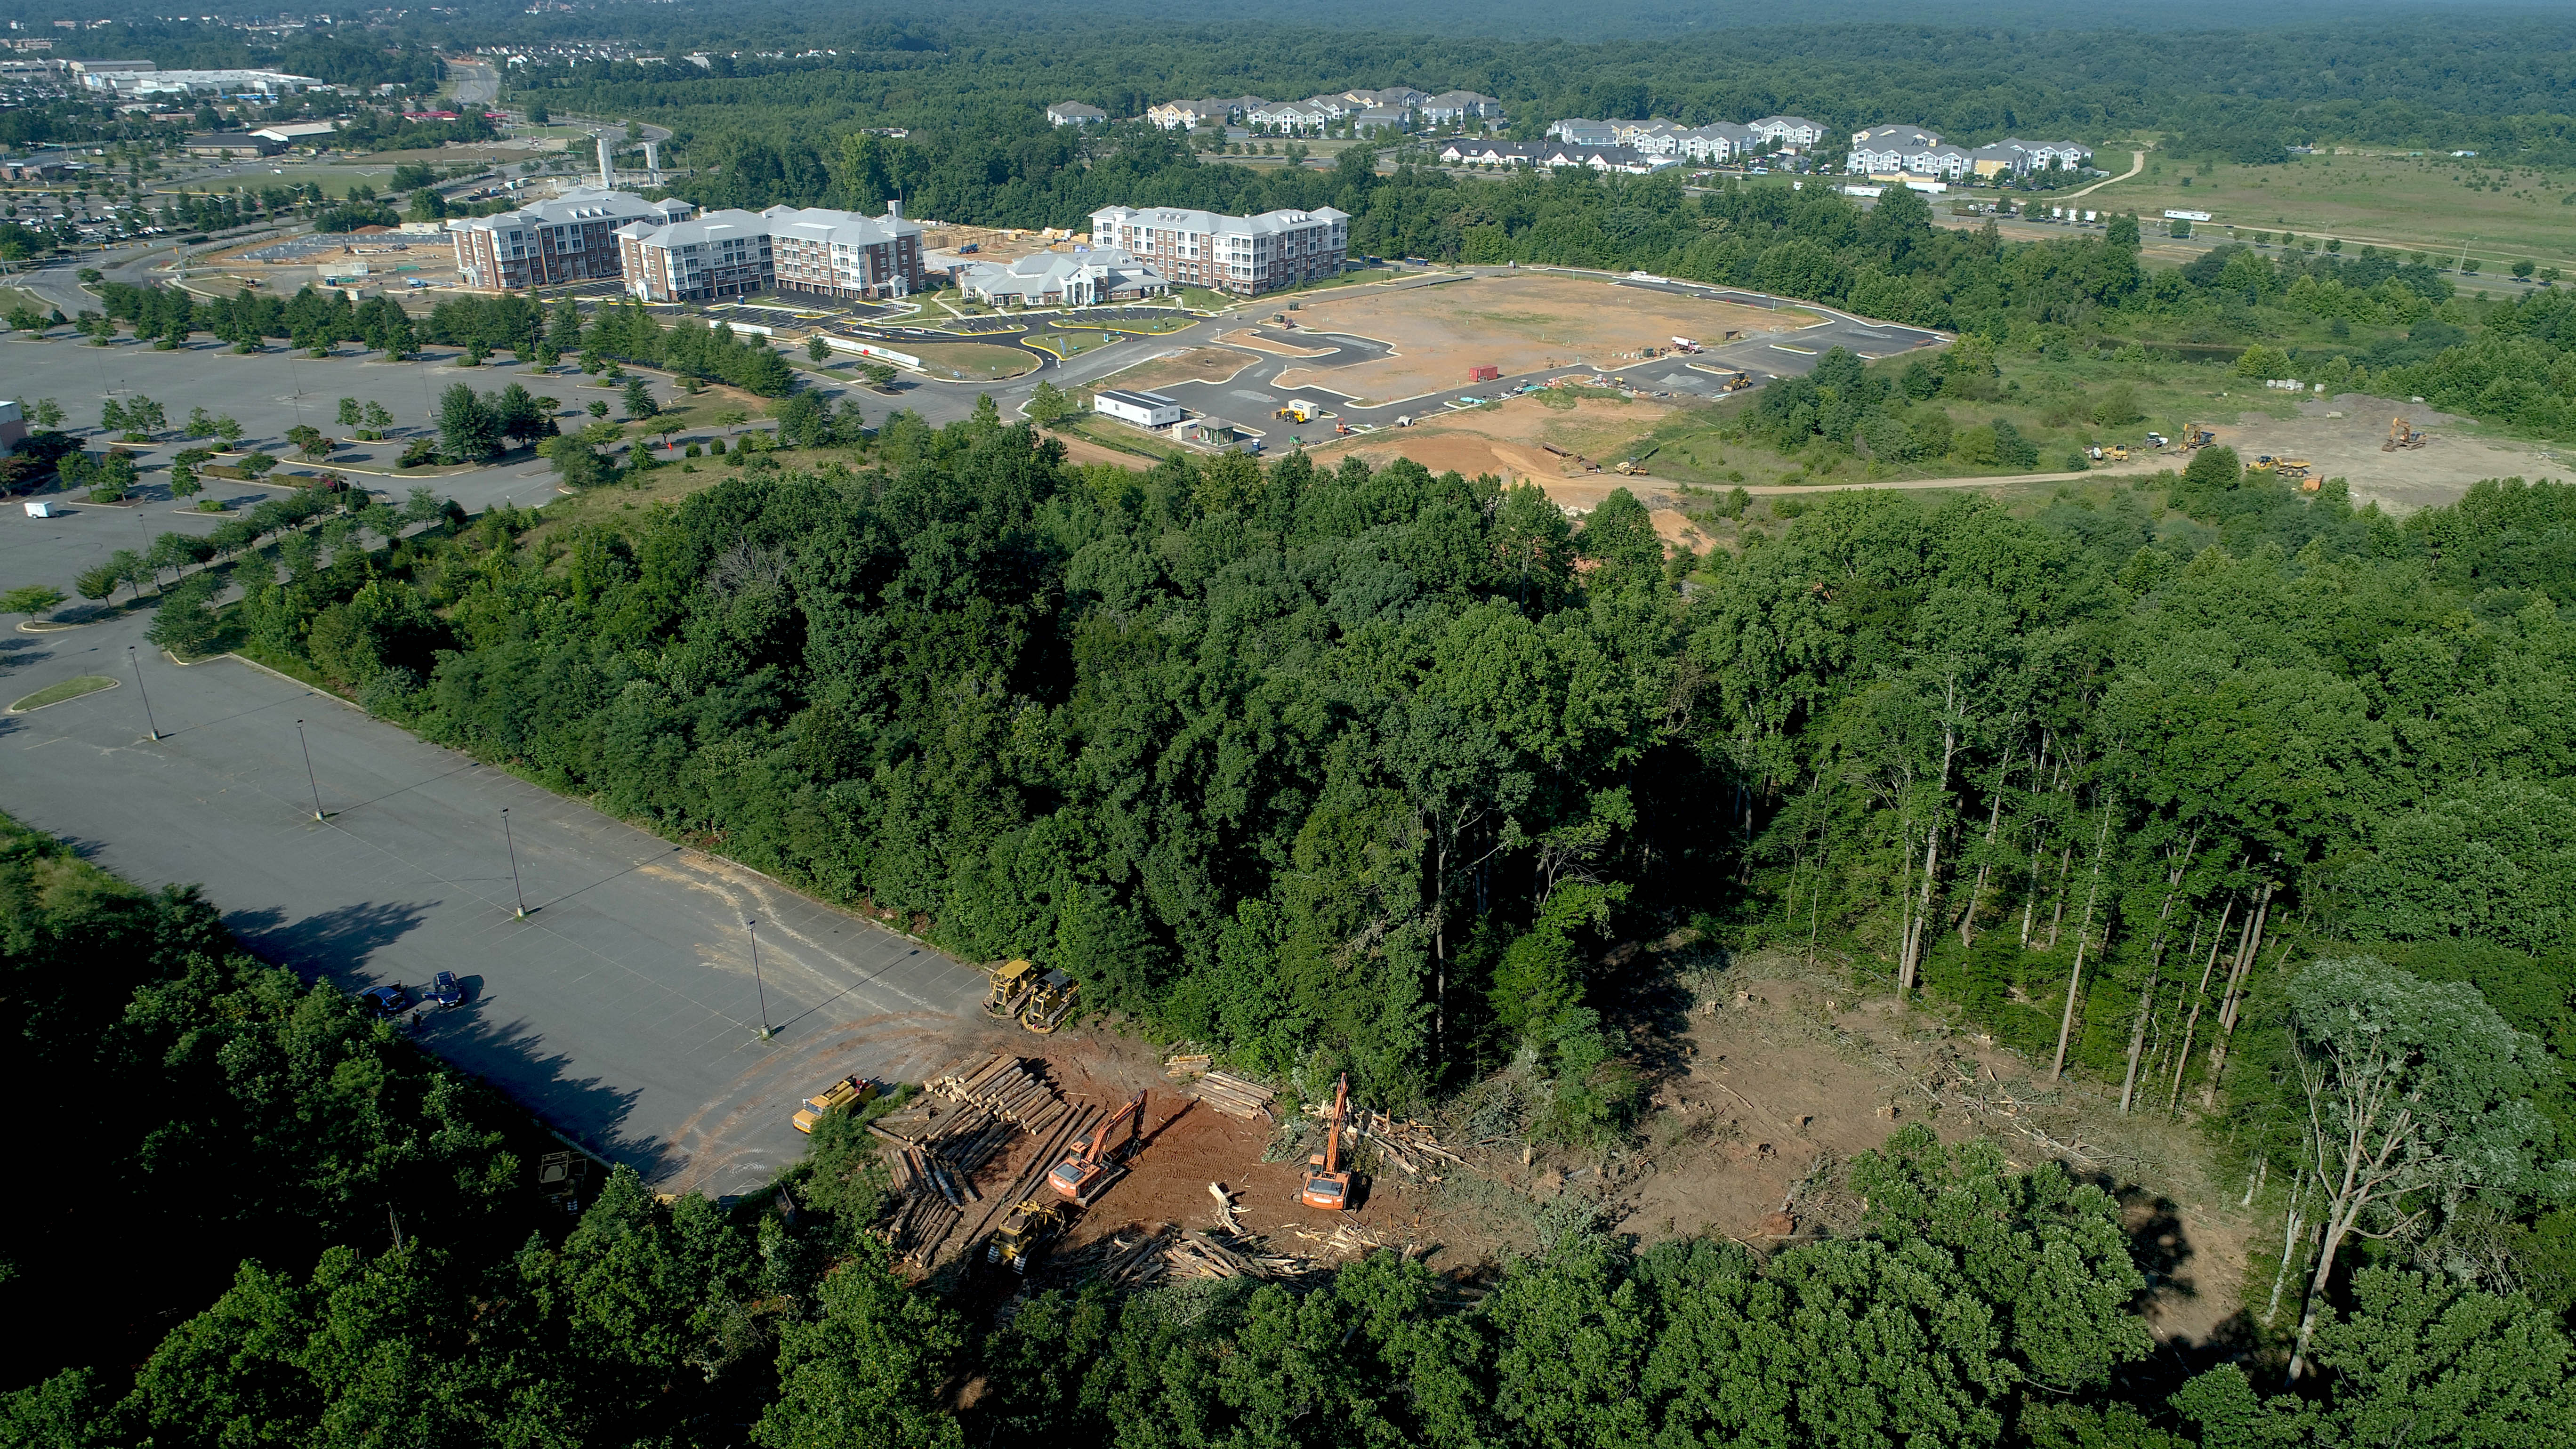 Stadium among many projects under way at Celebrate Virginia South